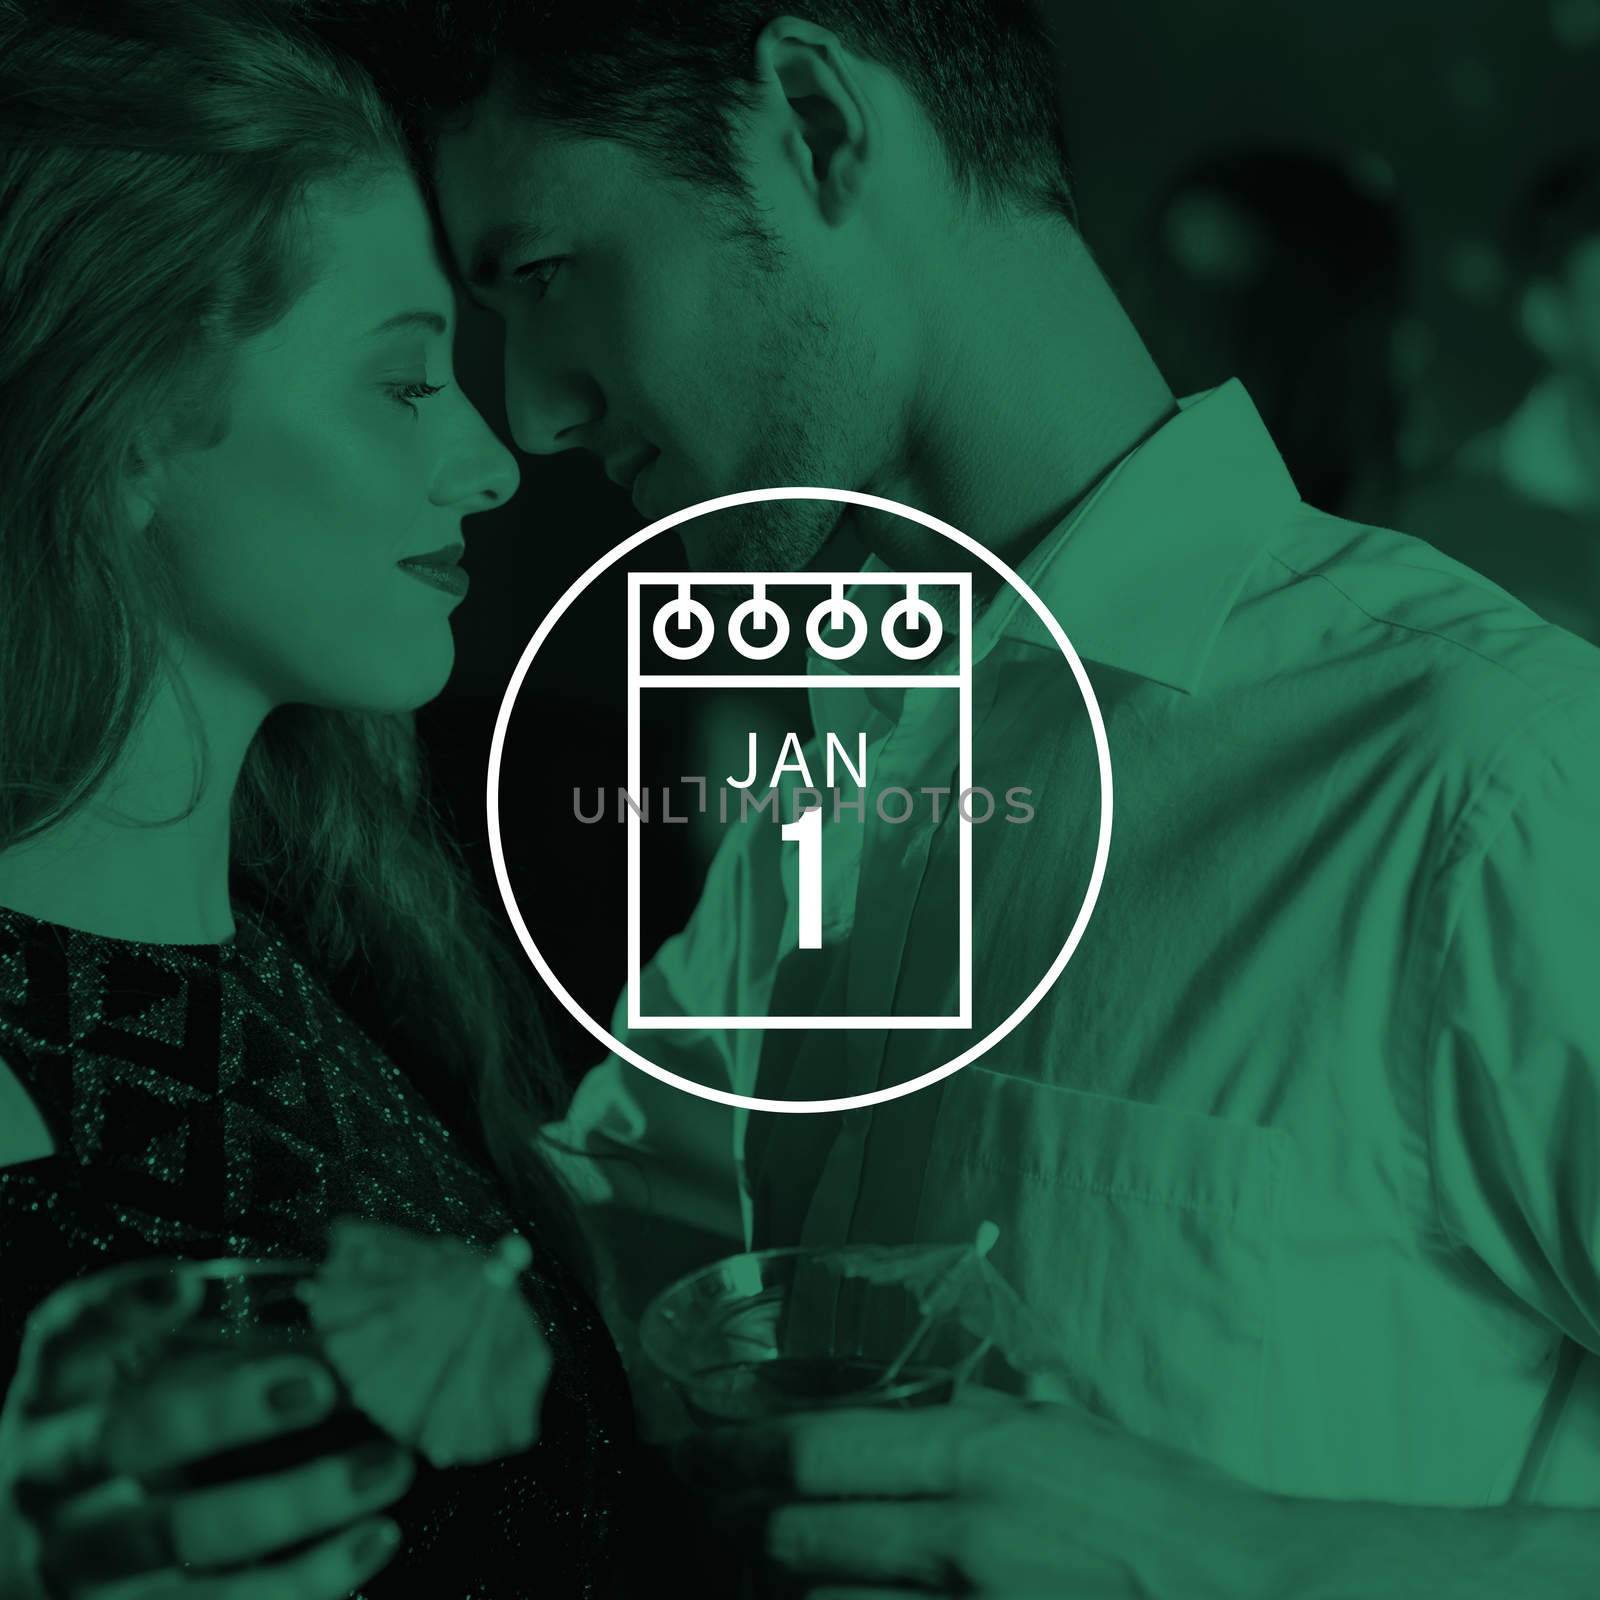 Calendar against cute couple drinking cocktails together